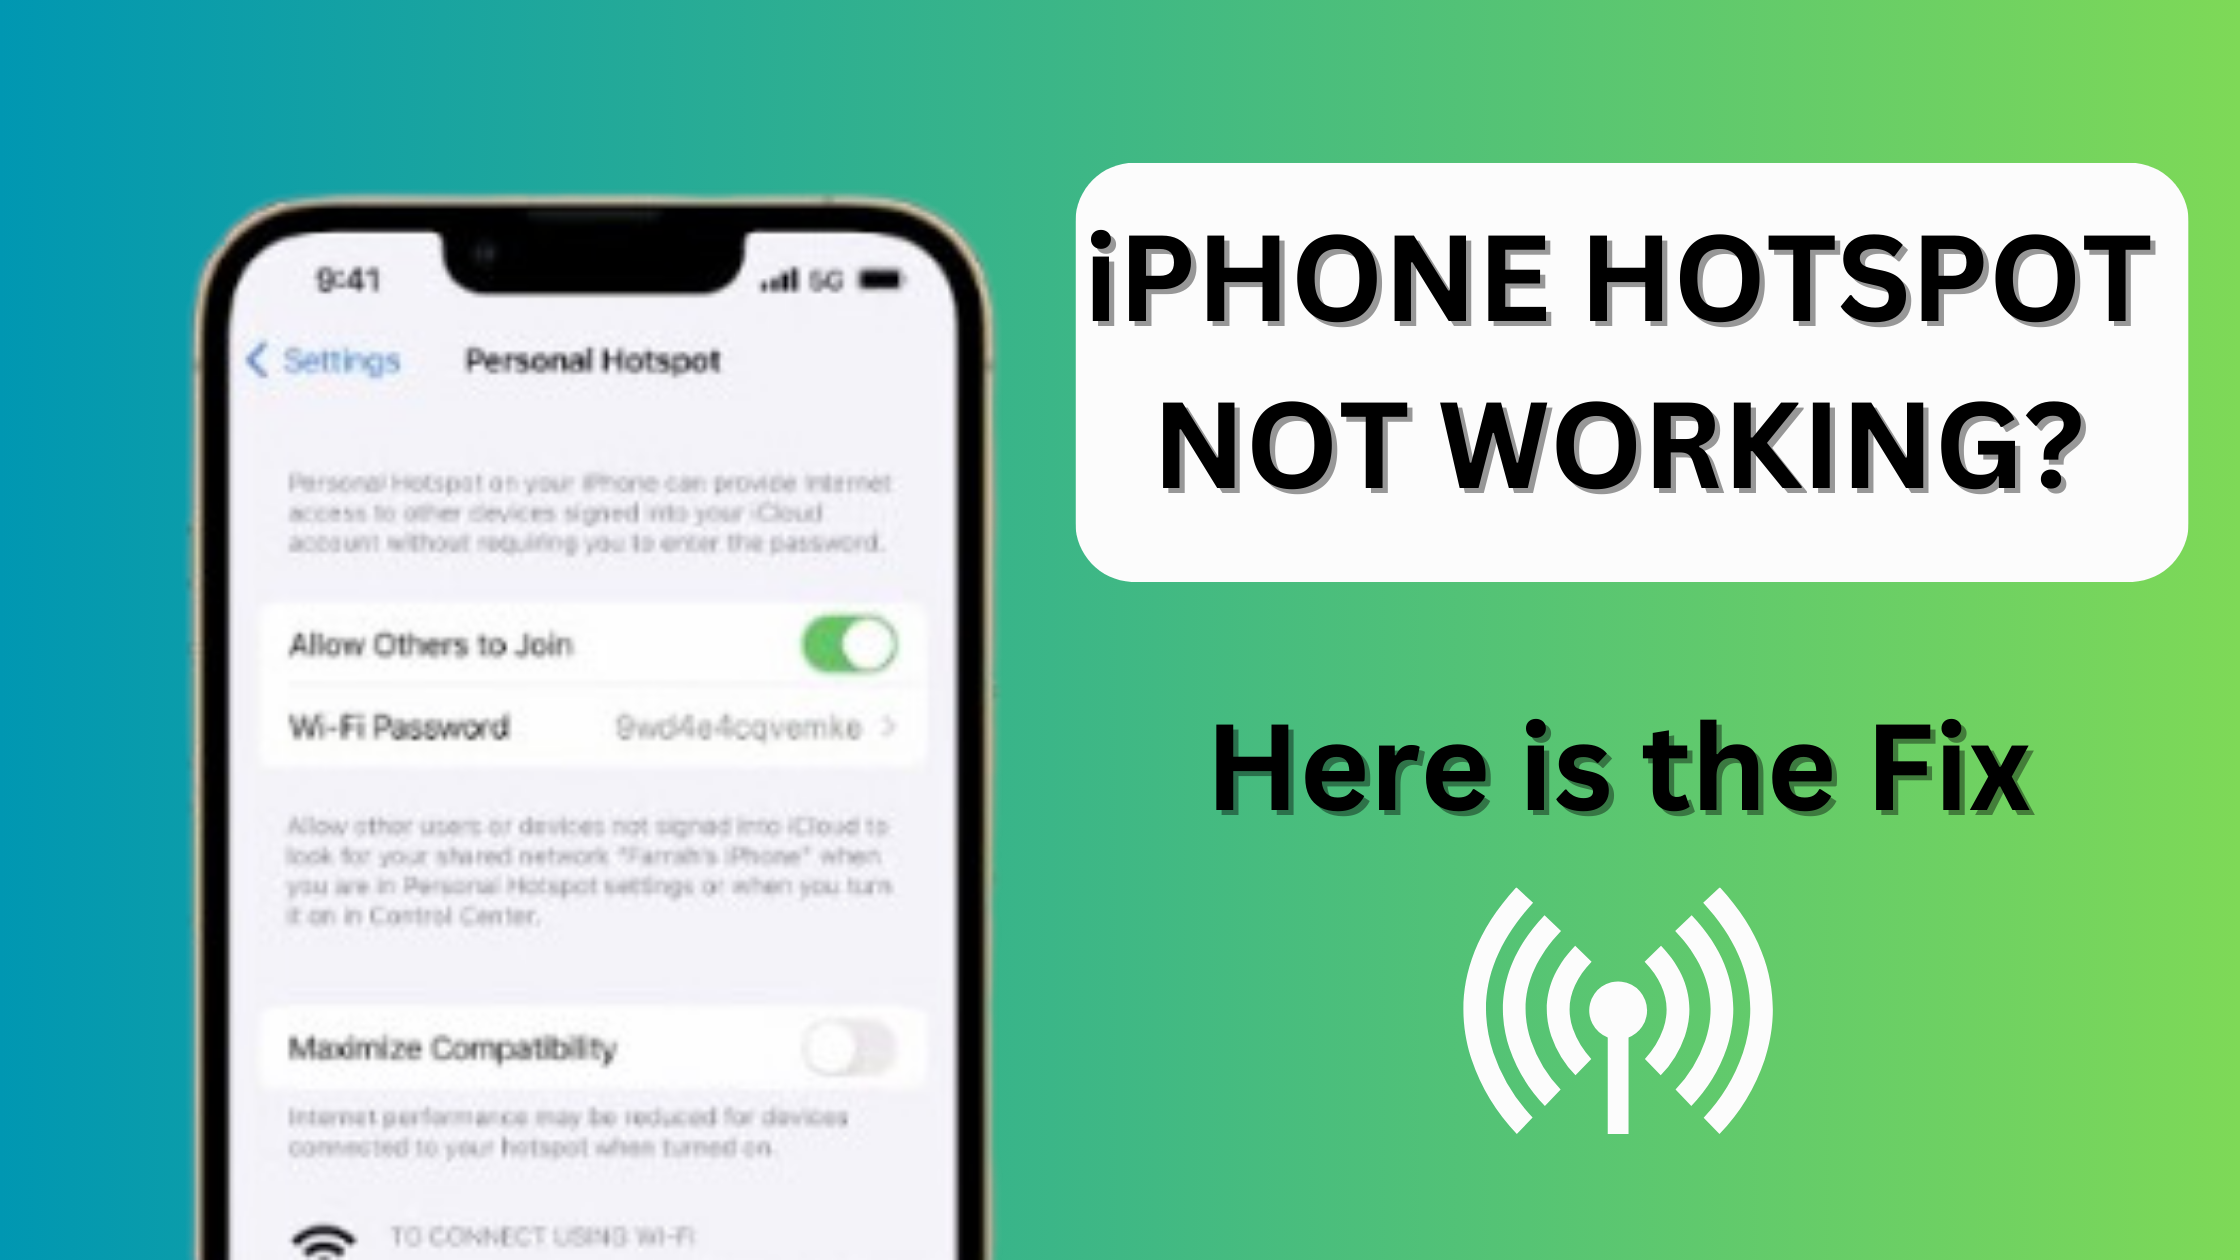 How to Keep iPhone Hotspot On When Locked